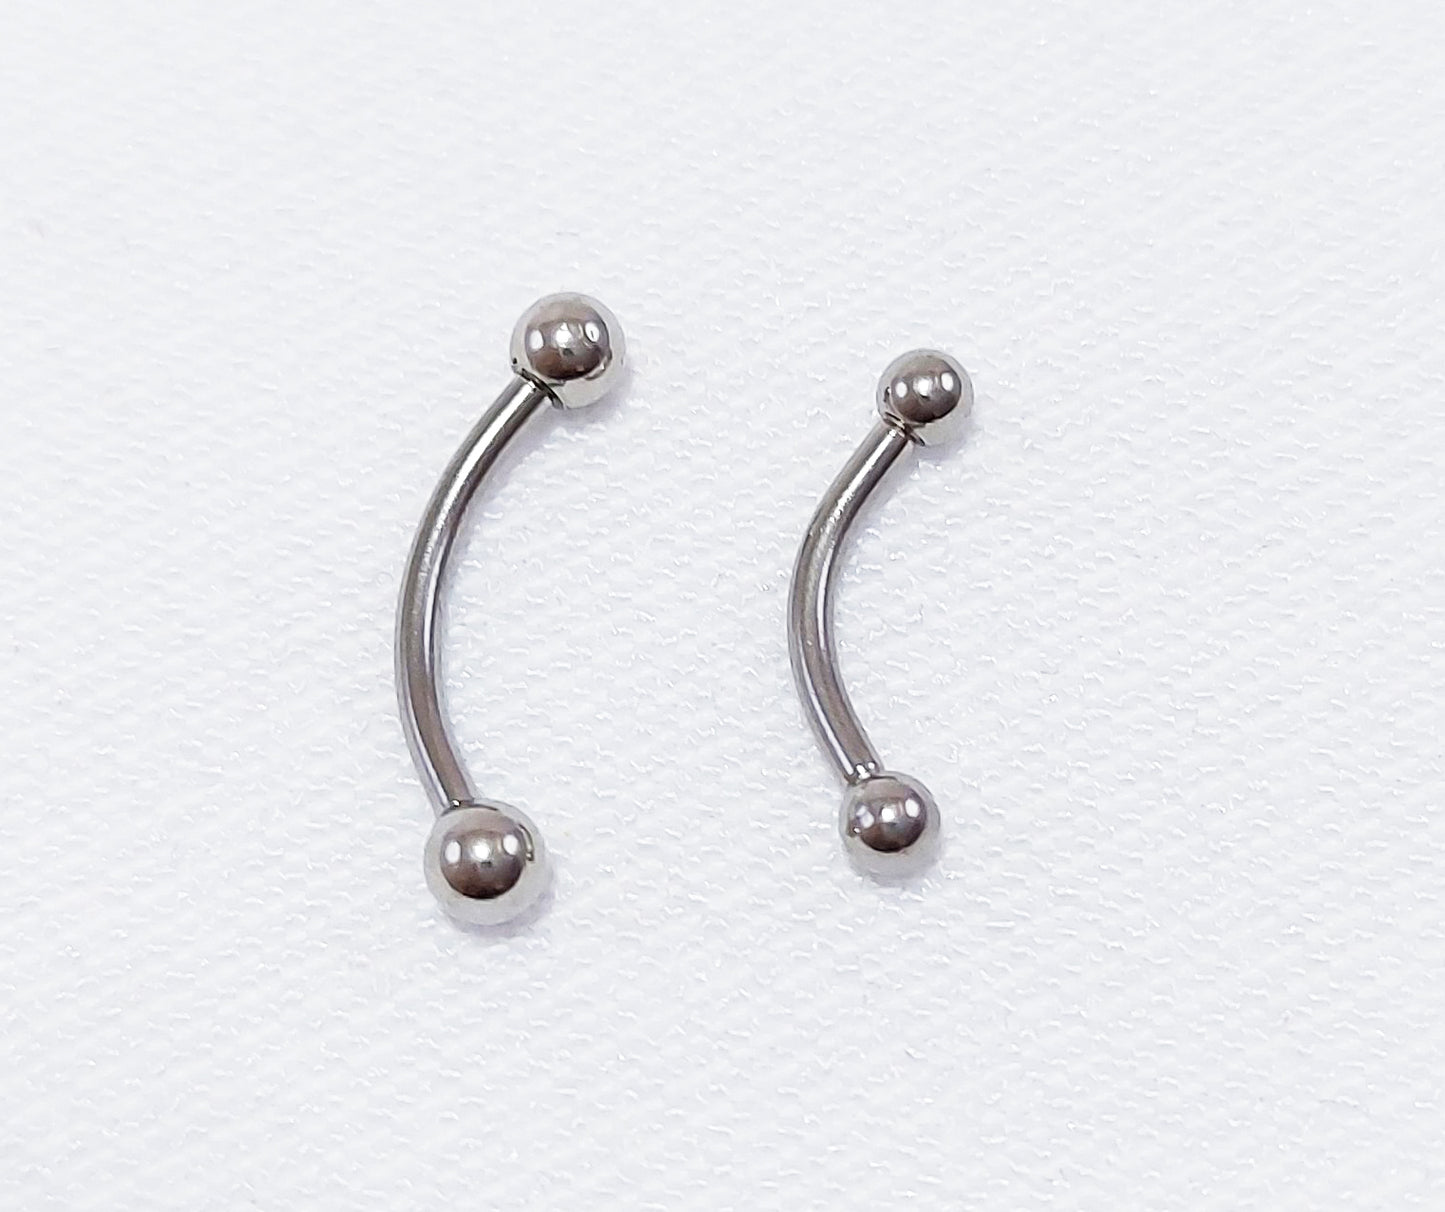 Surgical Steel Eyebrow Bar. Available in 2 Sizes